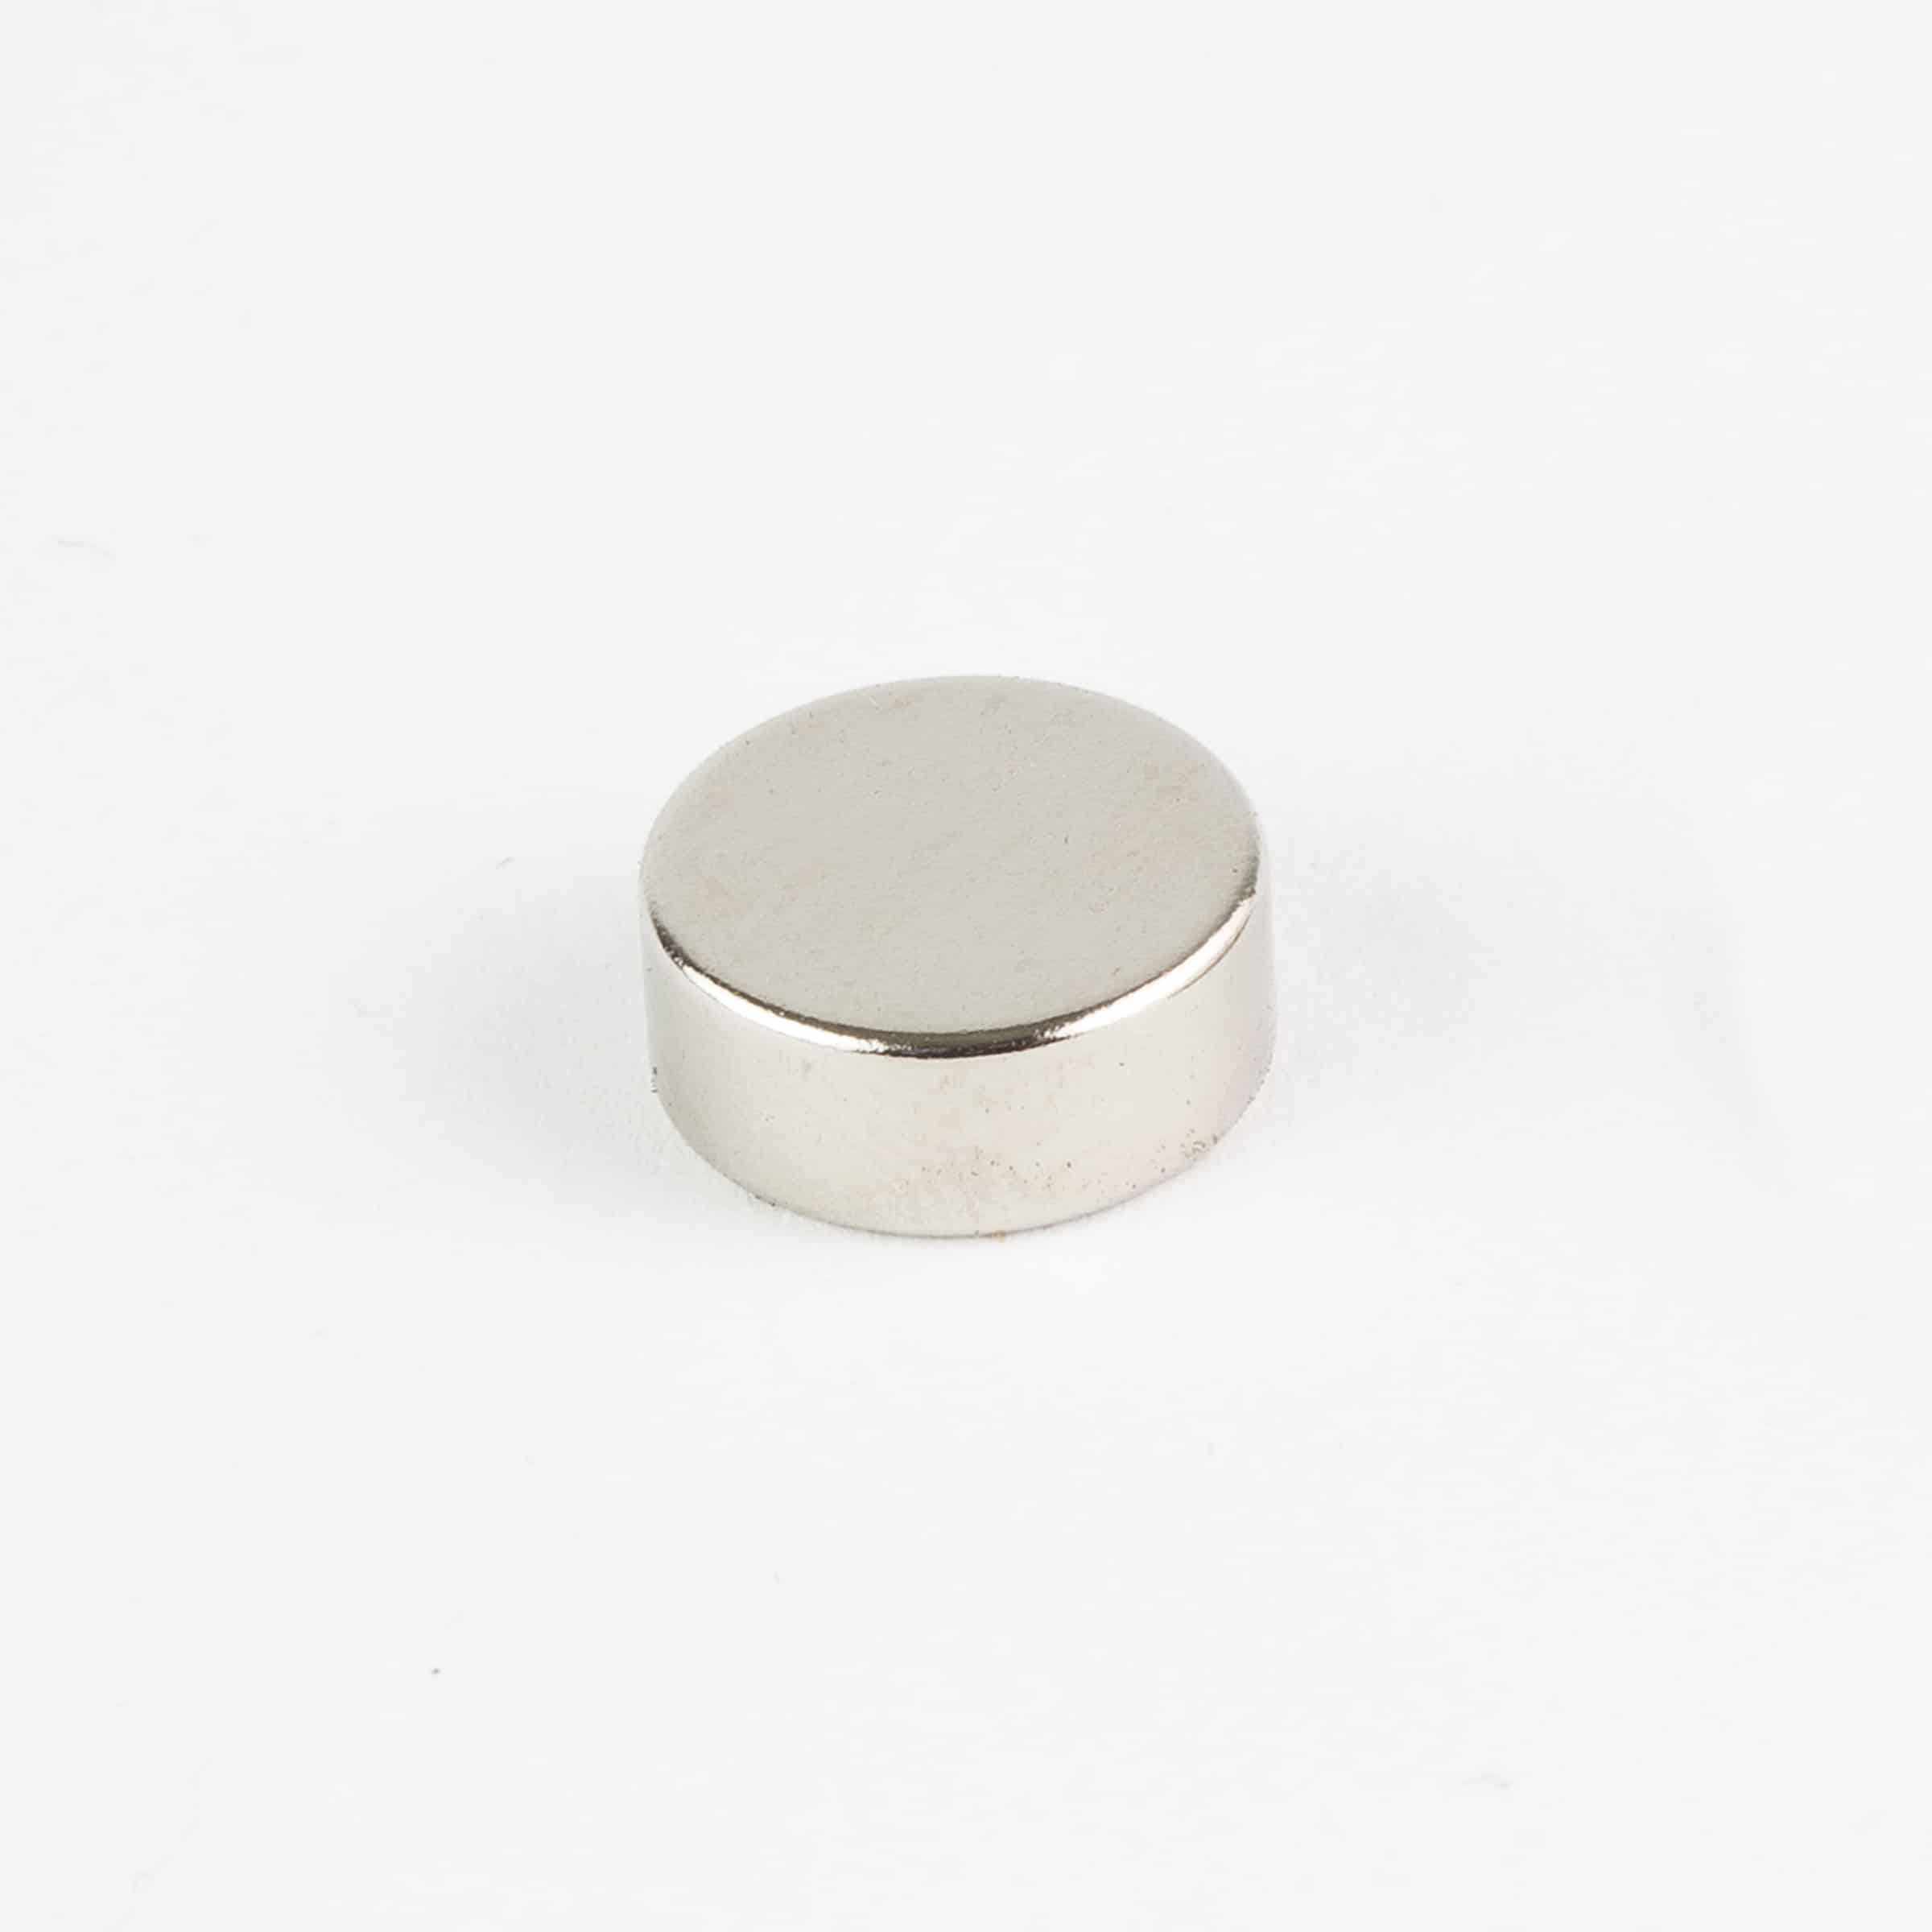 China Low Price Neodymium Magnet N35 Small Square Power Strong Magnets Rare  Earth Neodymium Magnets New Magnet 2023 Imanes Block Magnet - Quotation -  GNS COMPONENTS